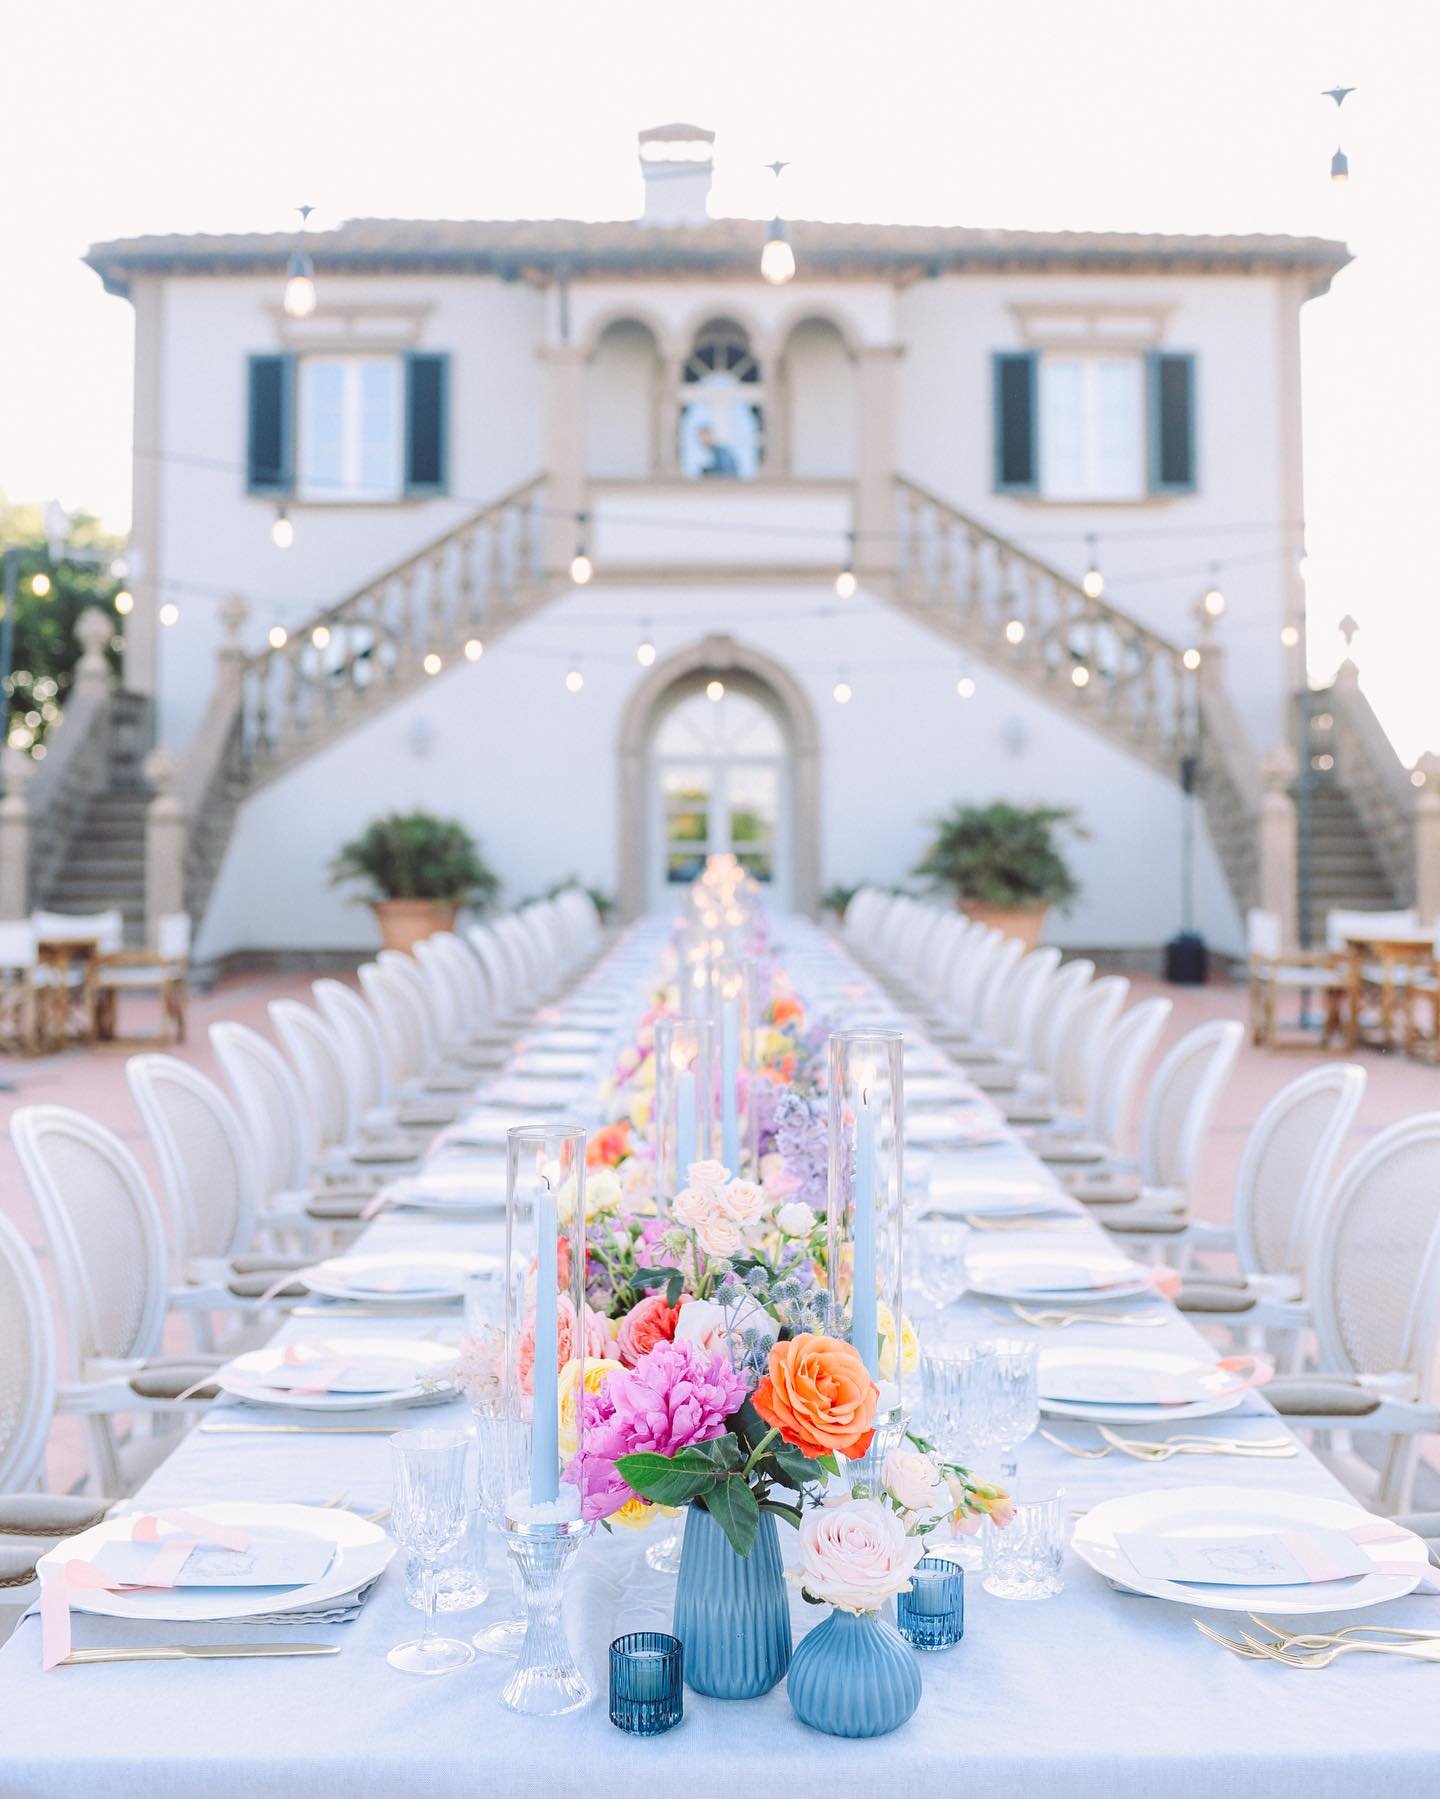 Laura and Pieter&rsquo;s enchanting outdoor reception: dusty blue linens, menus tied with pale pink ribbons, flowers in assorted glass vases bursting with vibrant hues and powder blue candles casting a soft glow. 

Venue: @poggioalcasone
Planning &am